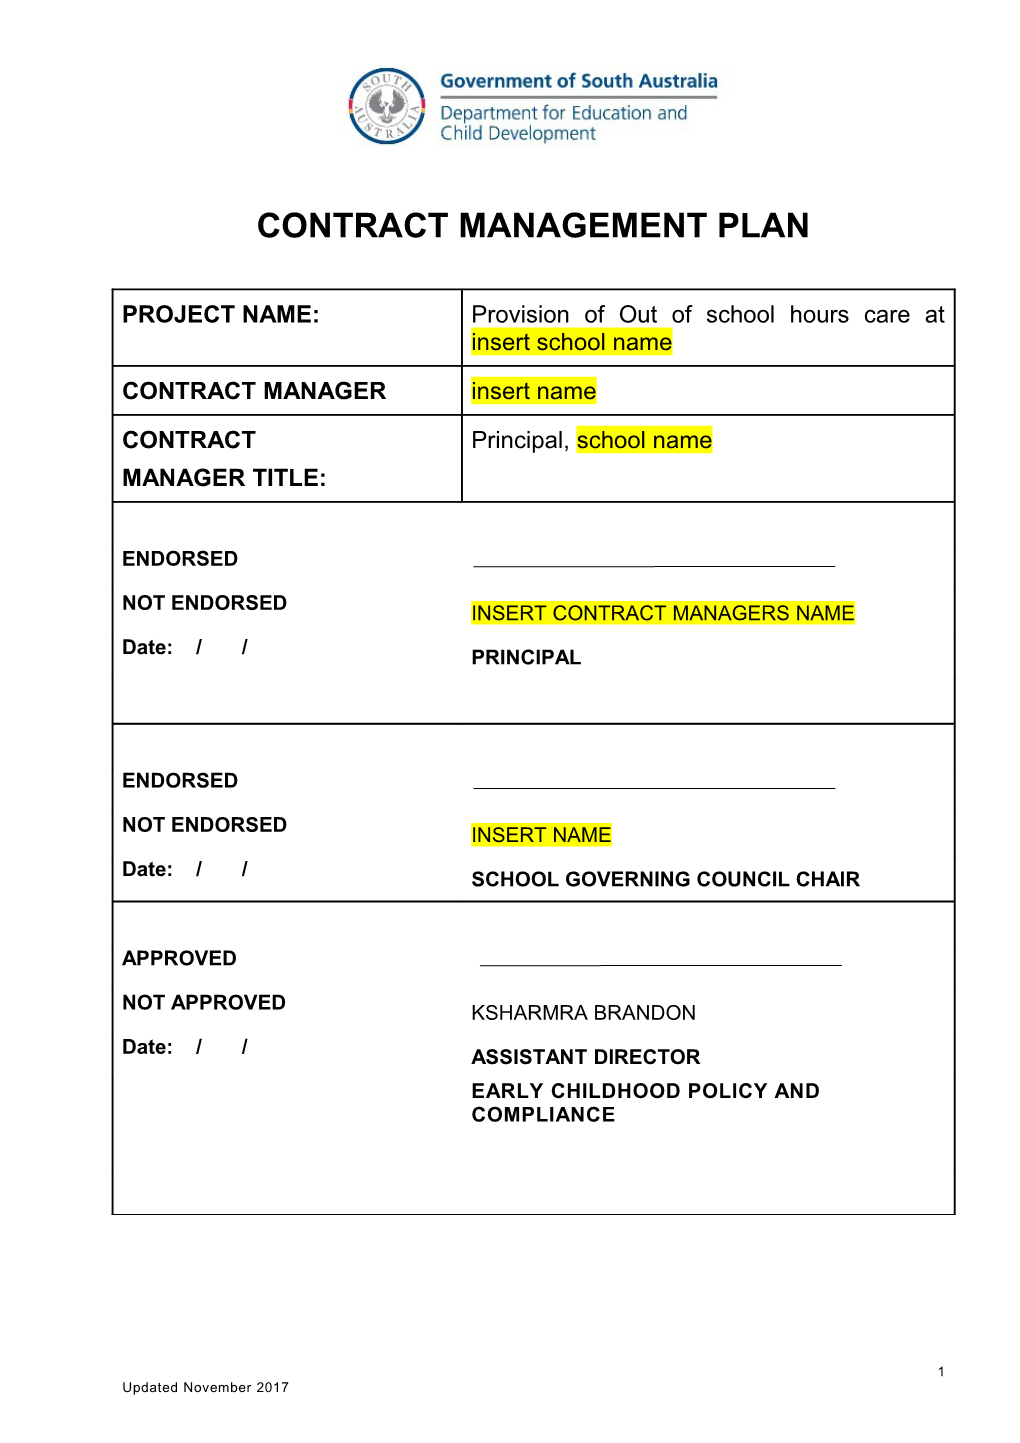 Contract Management Plan for out of School Hours Care